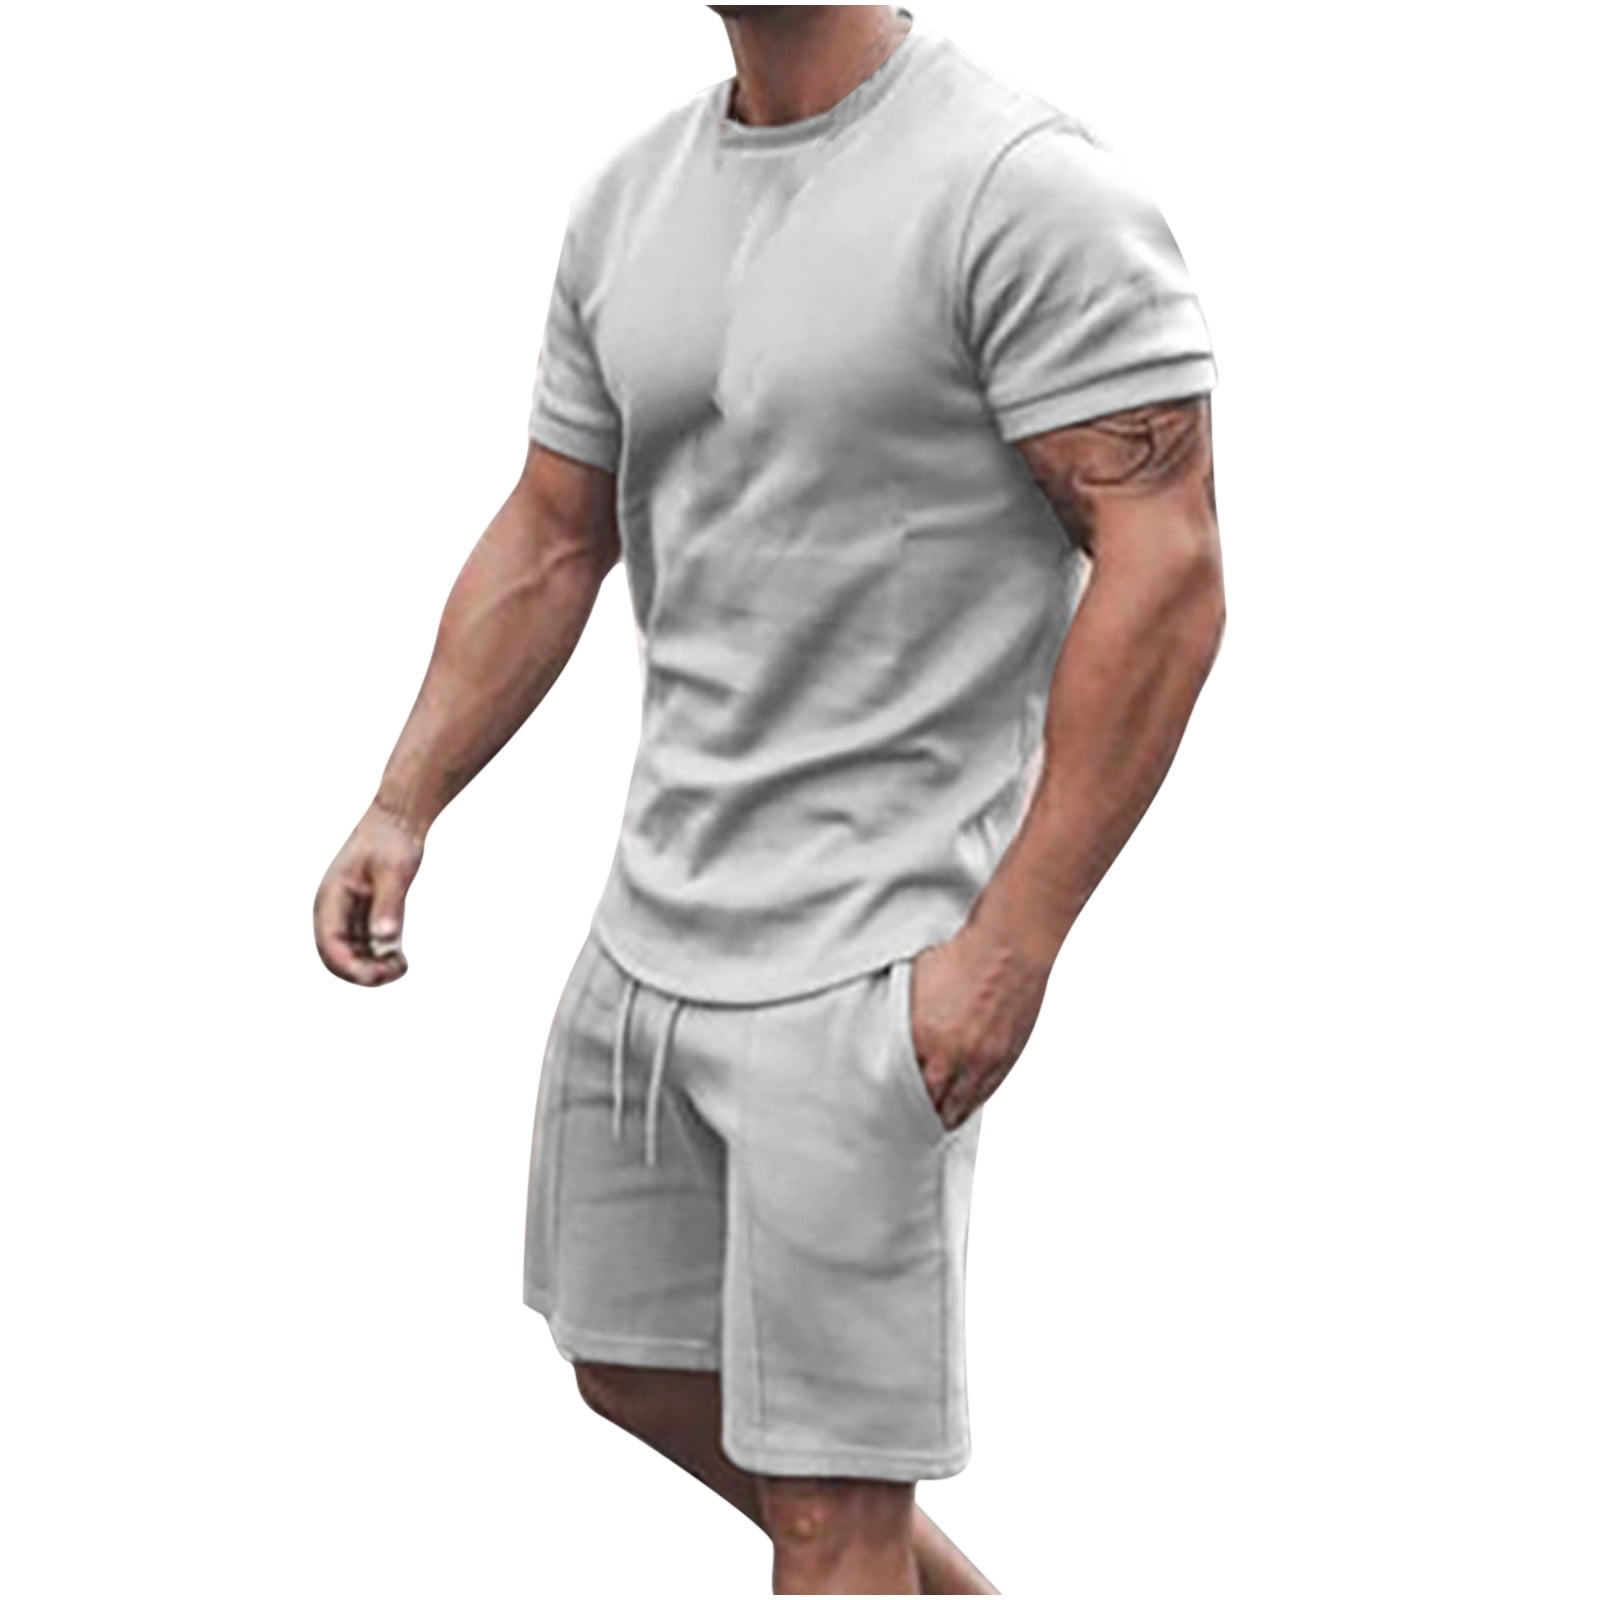 Meitianfacai Deals Clearance Summer Outfits Men 2 Piece Casual Short Sleeve  Tee Shirts And Fit Sport Shorts Set Short Sets Men 2 Piece Outfits Gray -  